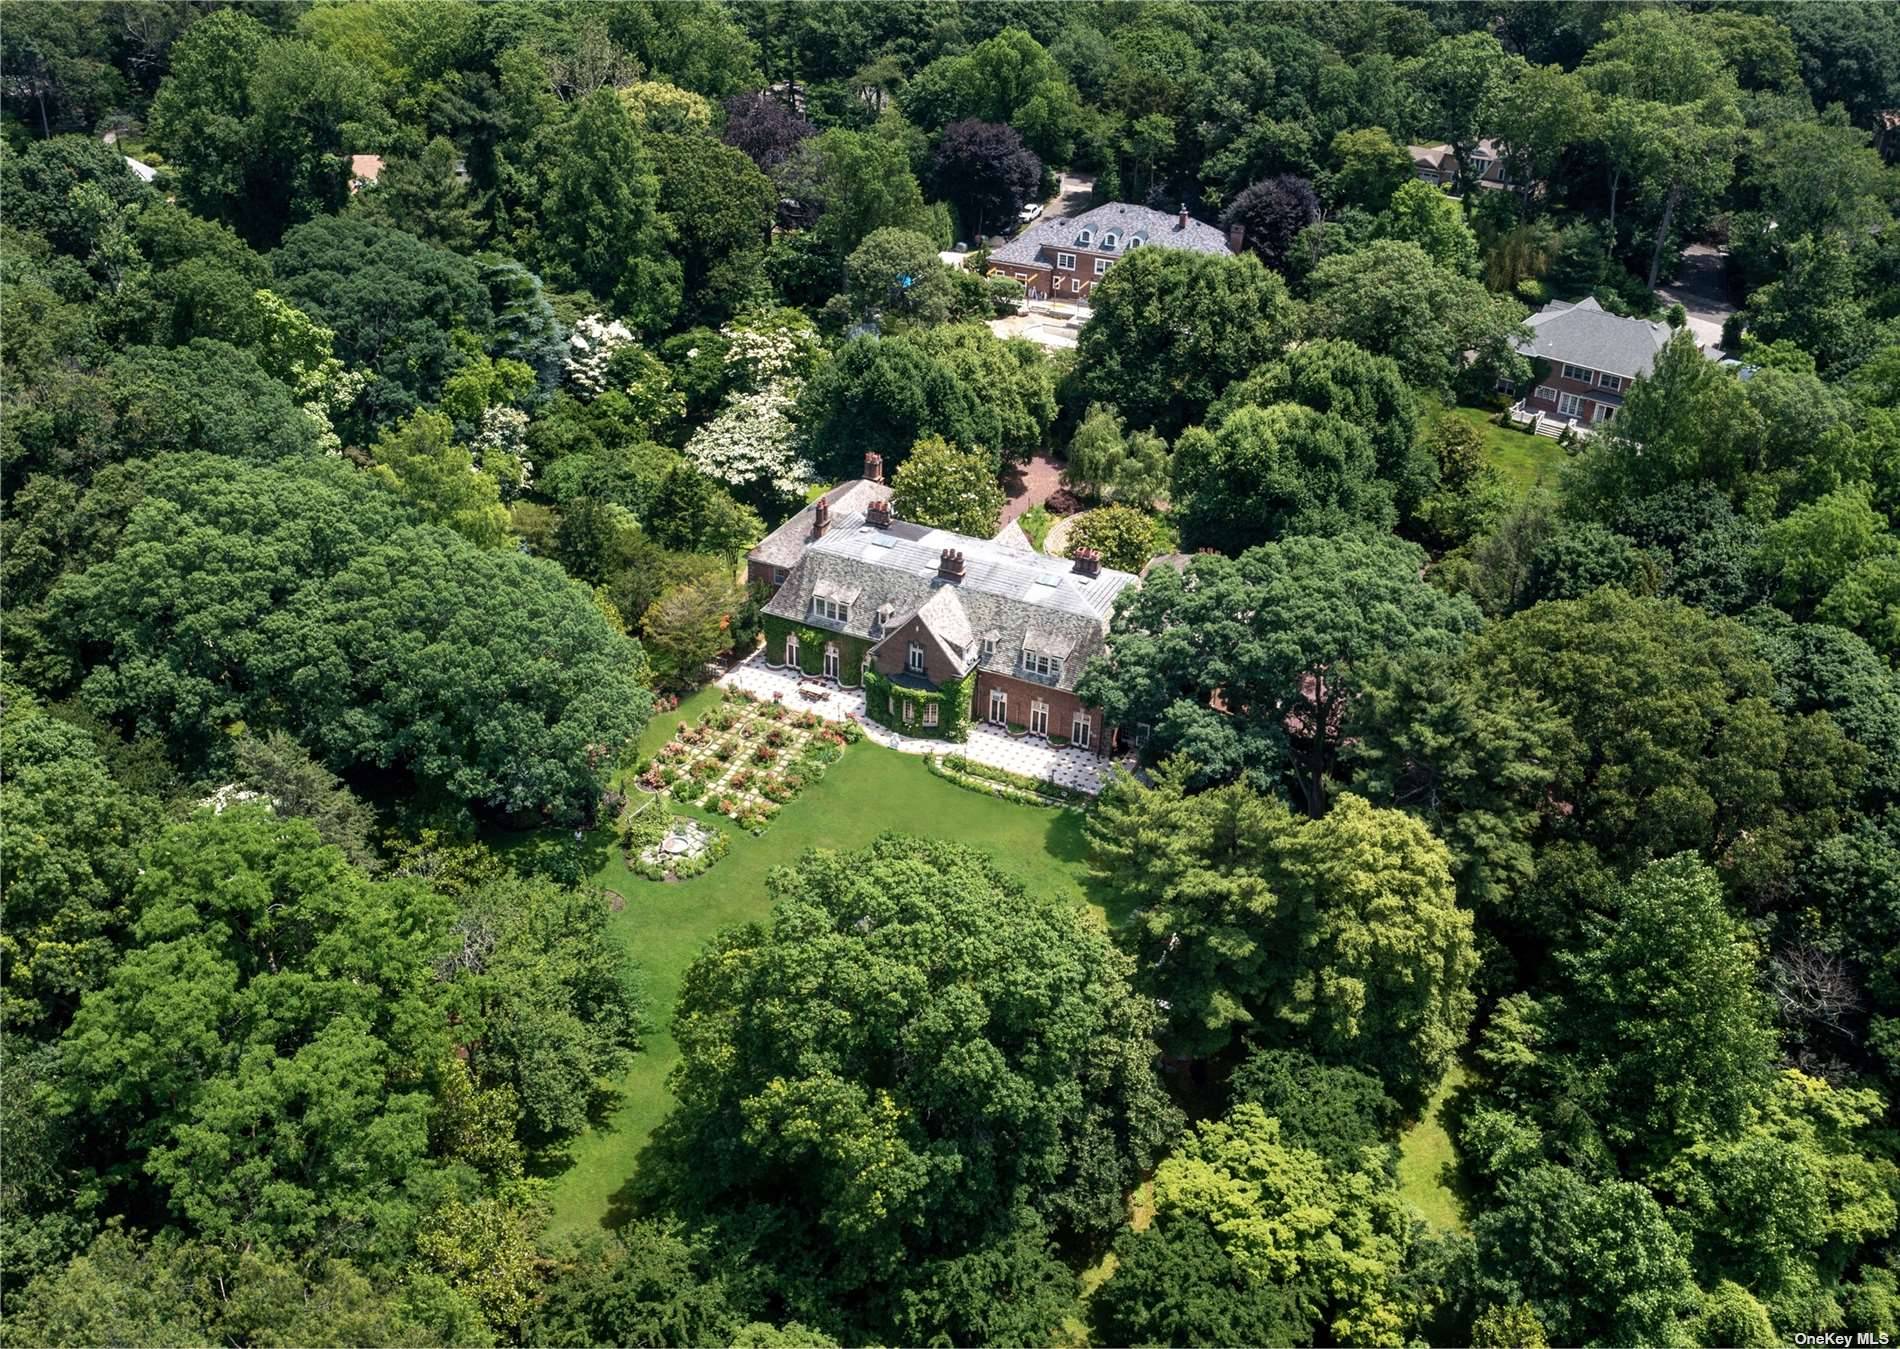 The Rivington House, an all brick restored roaring 20's estate situated on 3.